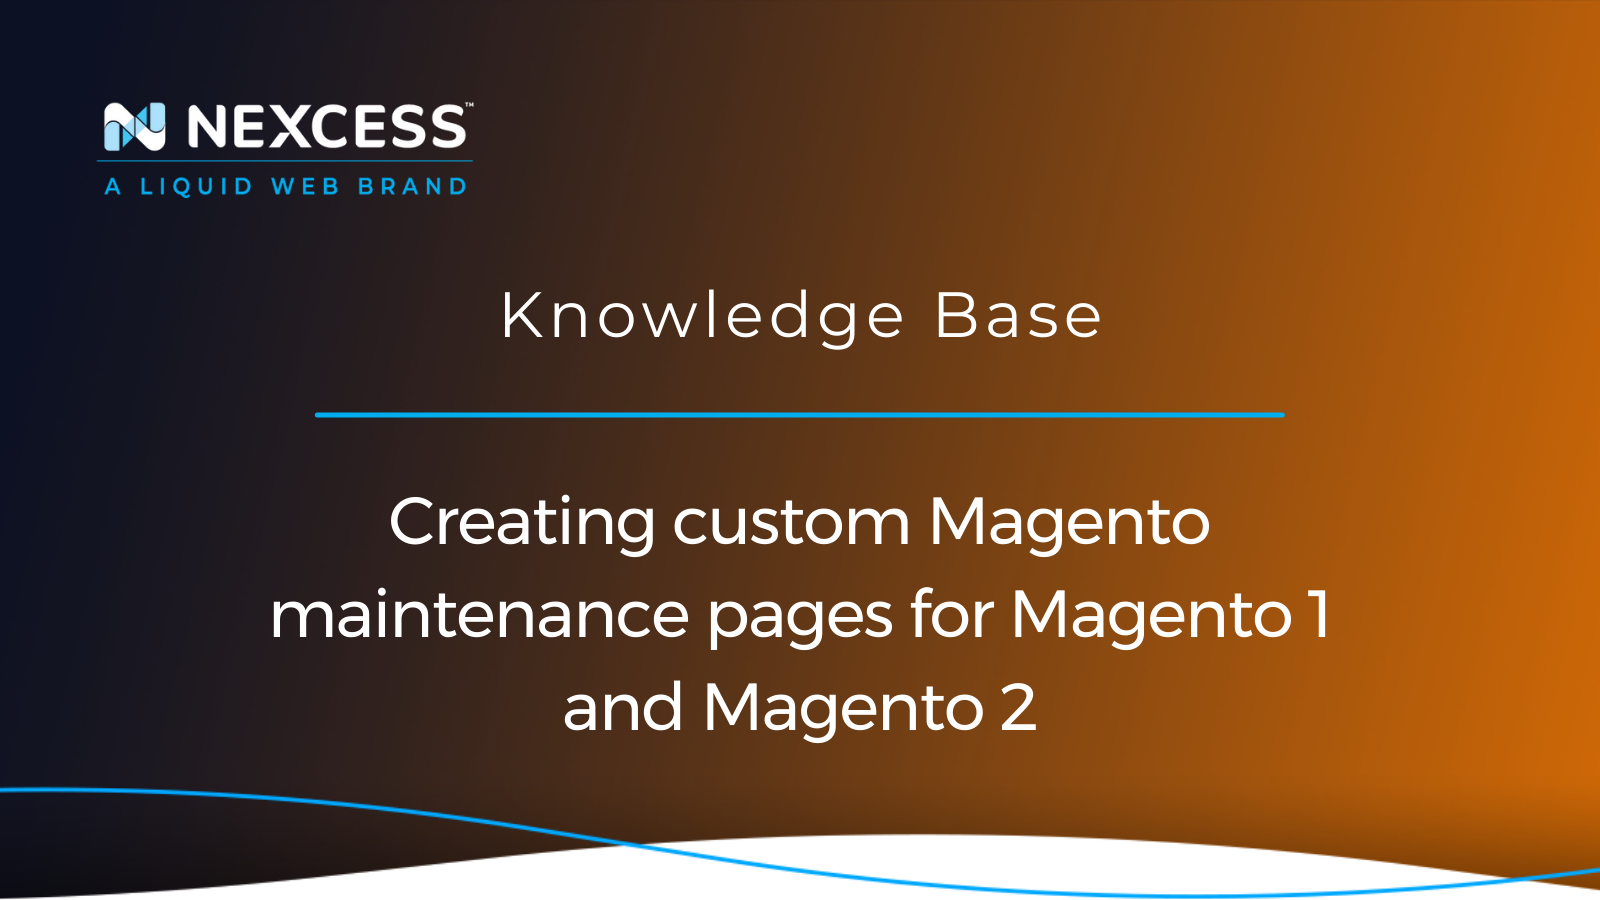 Creating custom Magento maintenance pages for Magento 1 and Magento 2